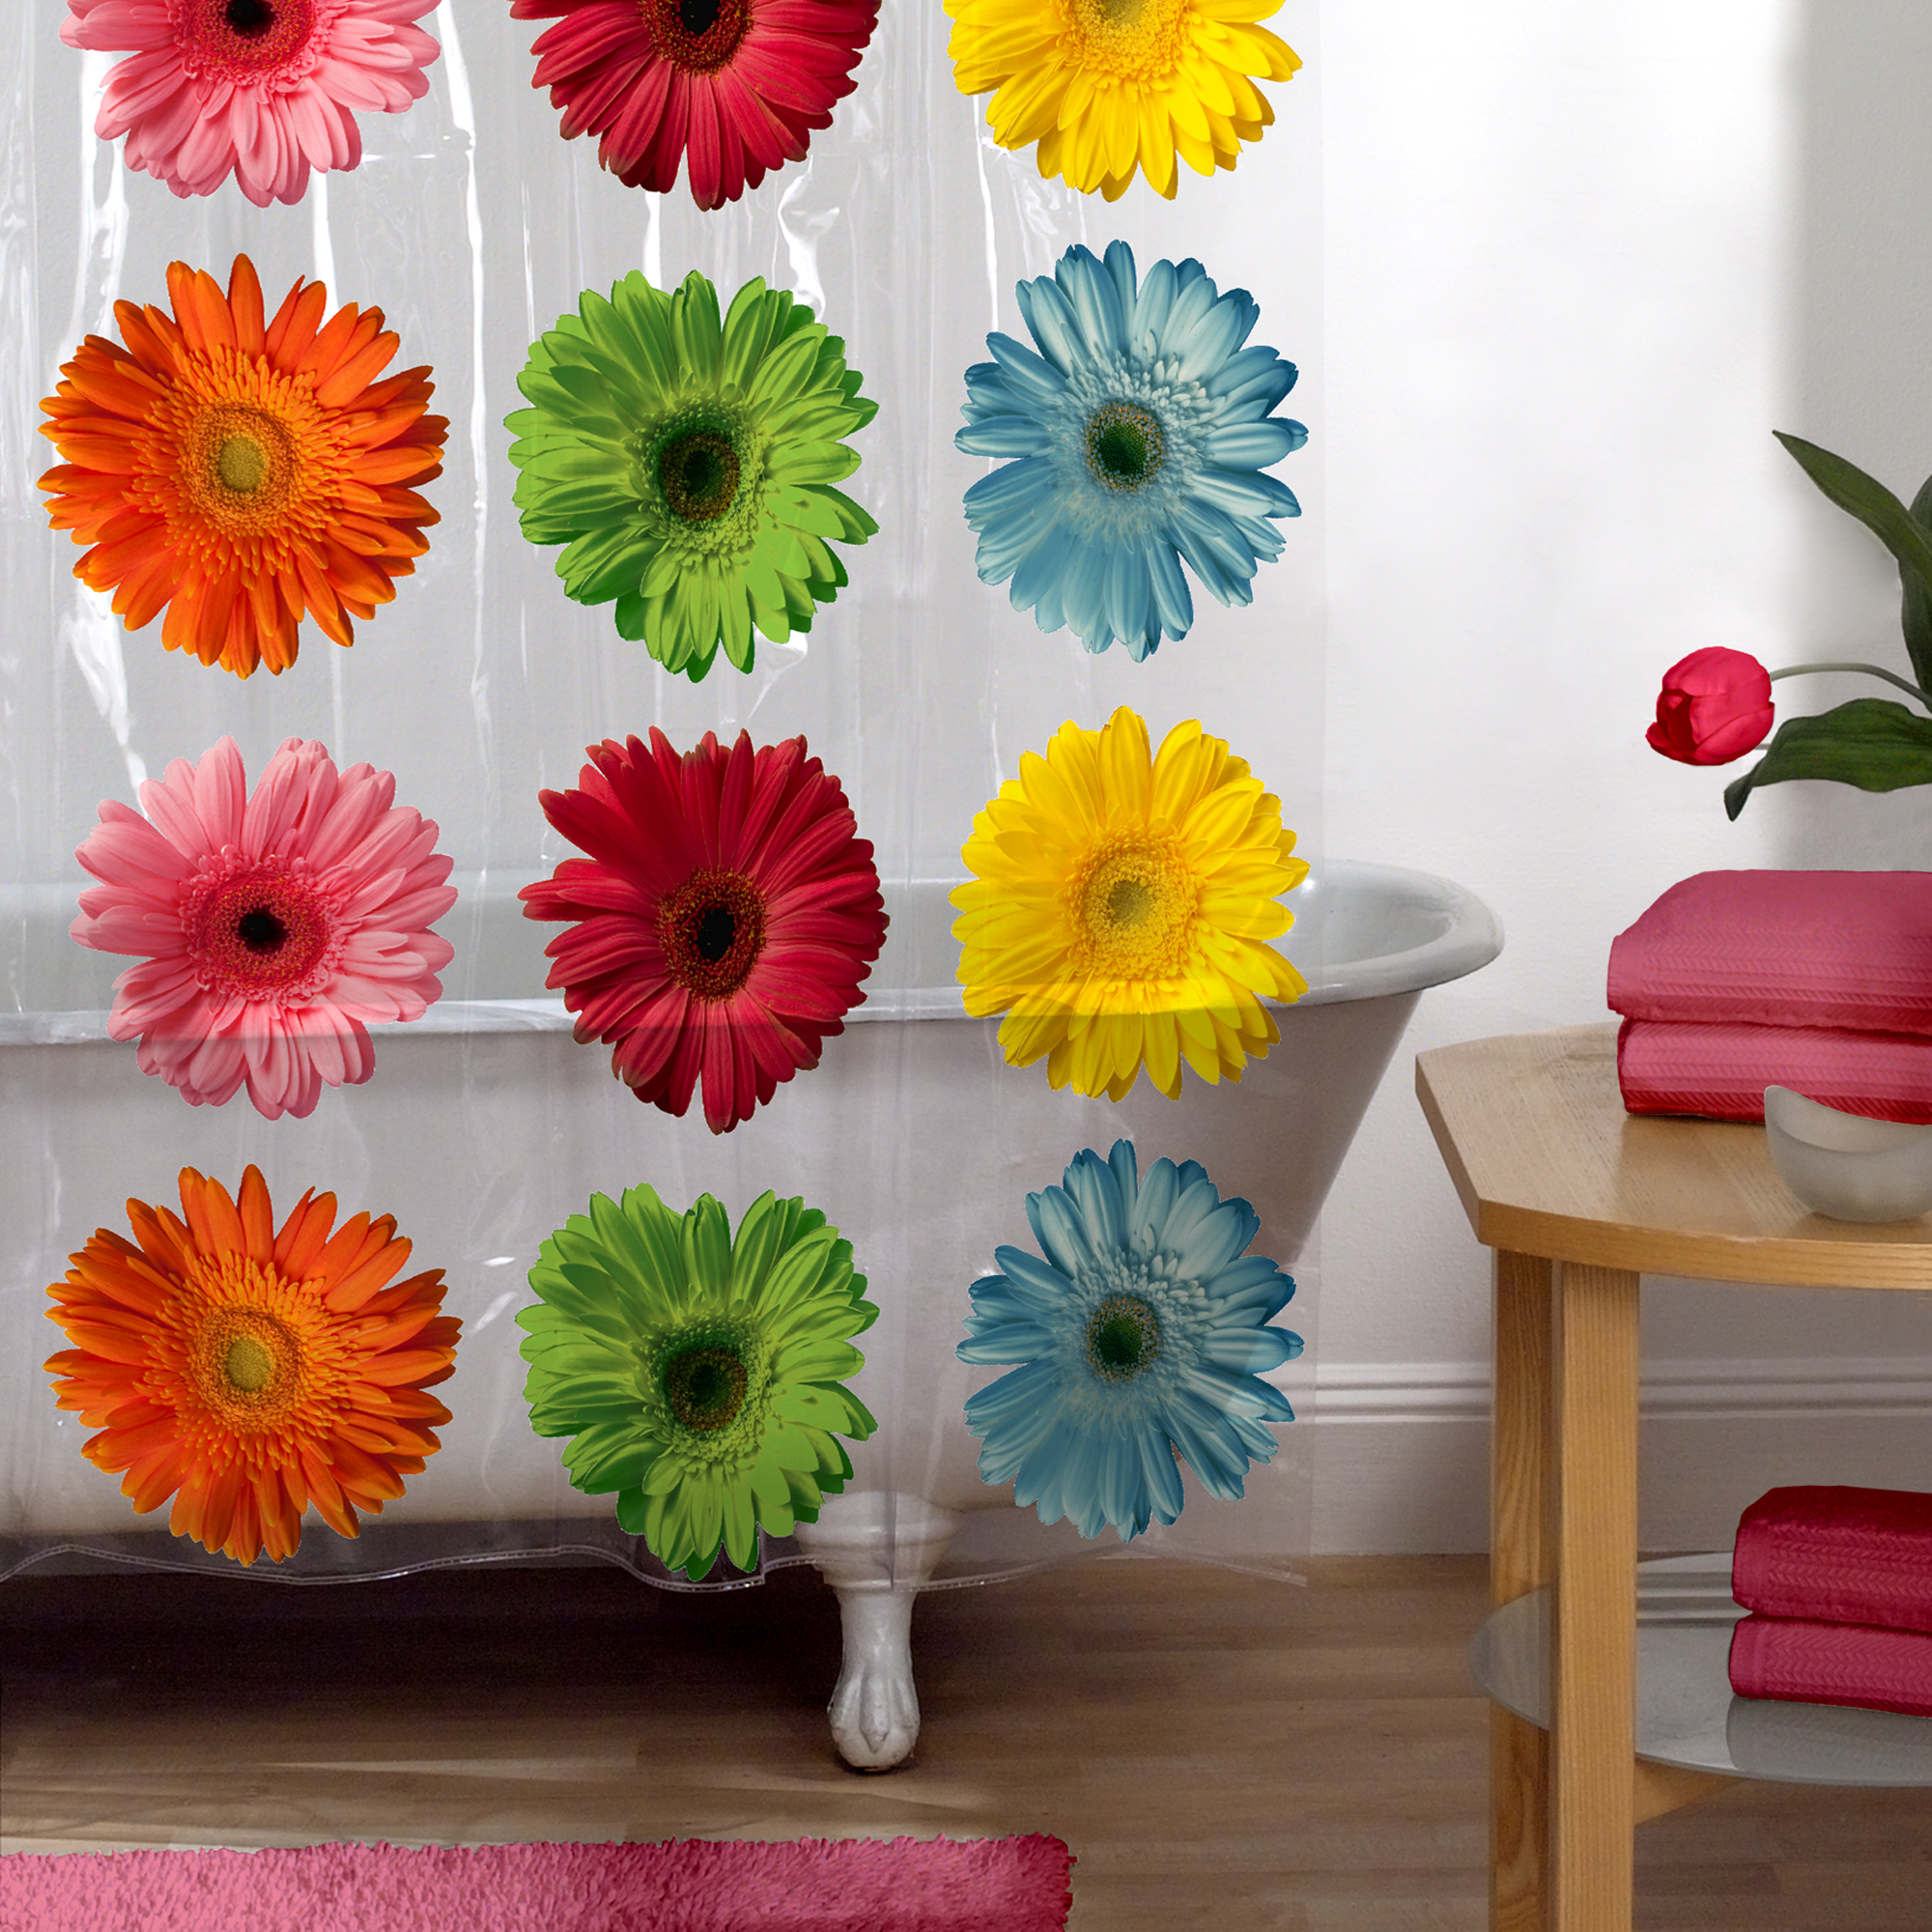 Gerber Daisy PEVA Shower Curtain, Floral - image 3 of 5